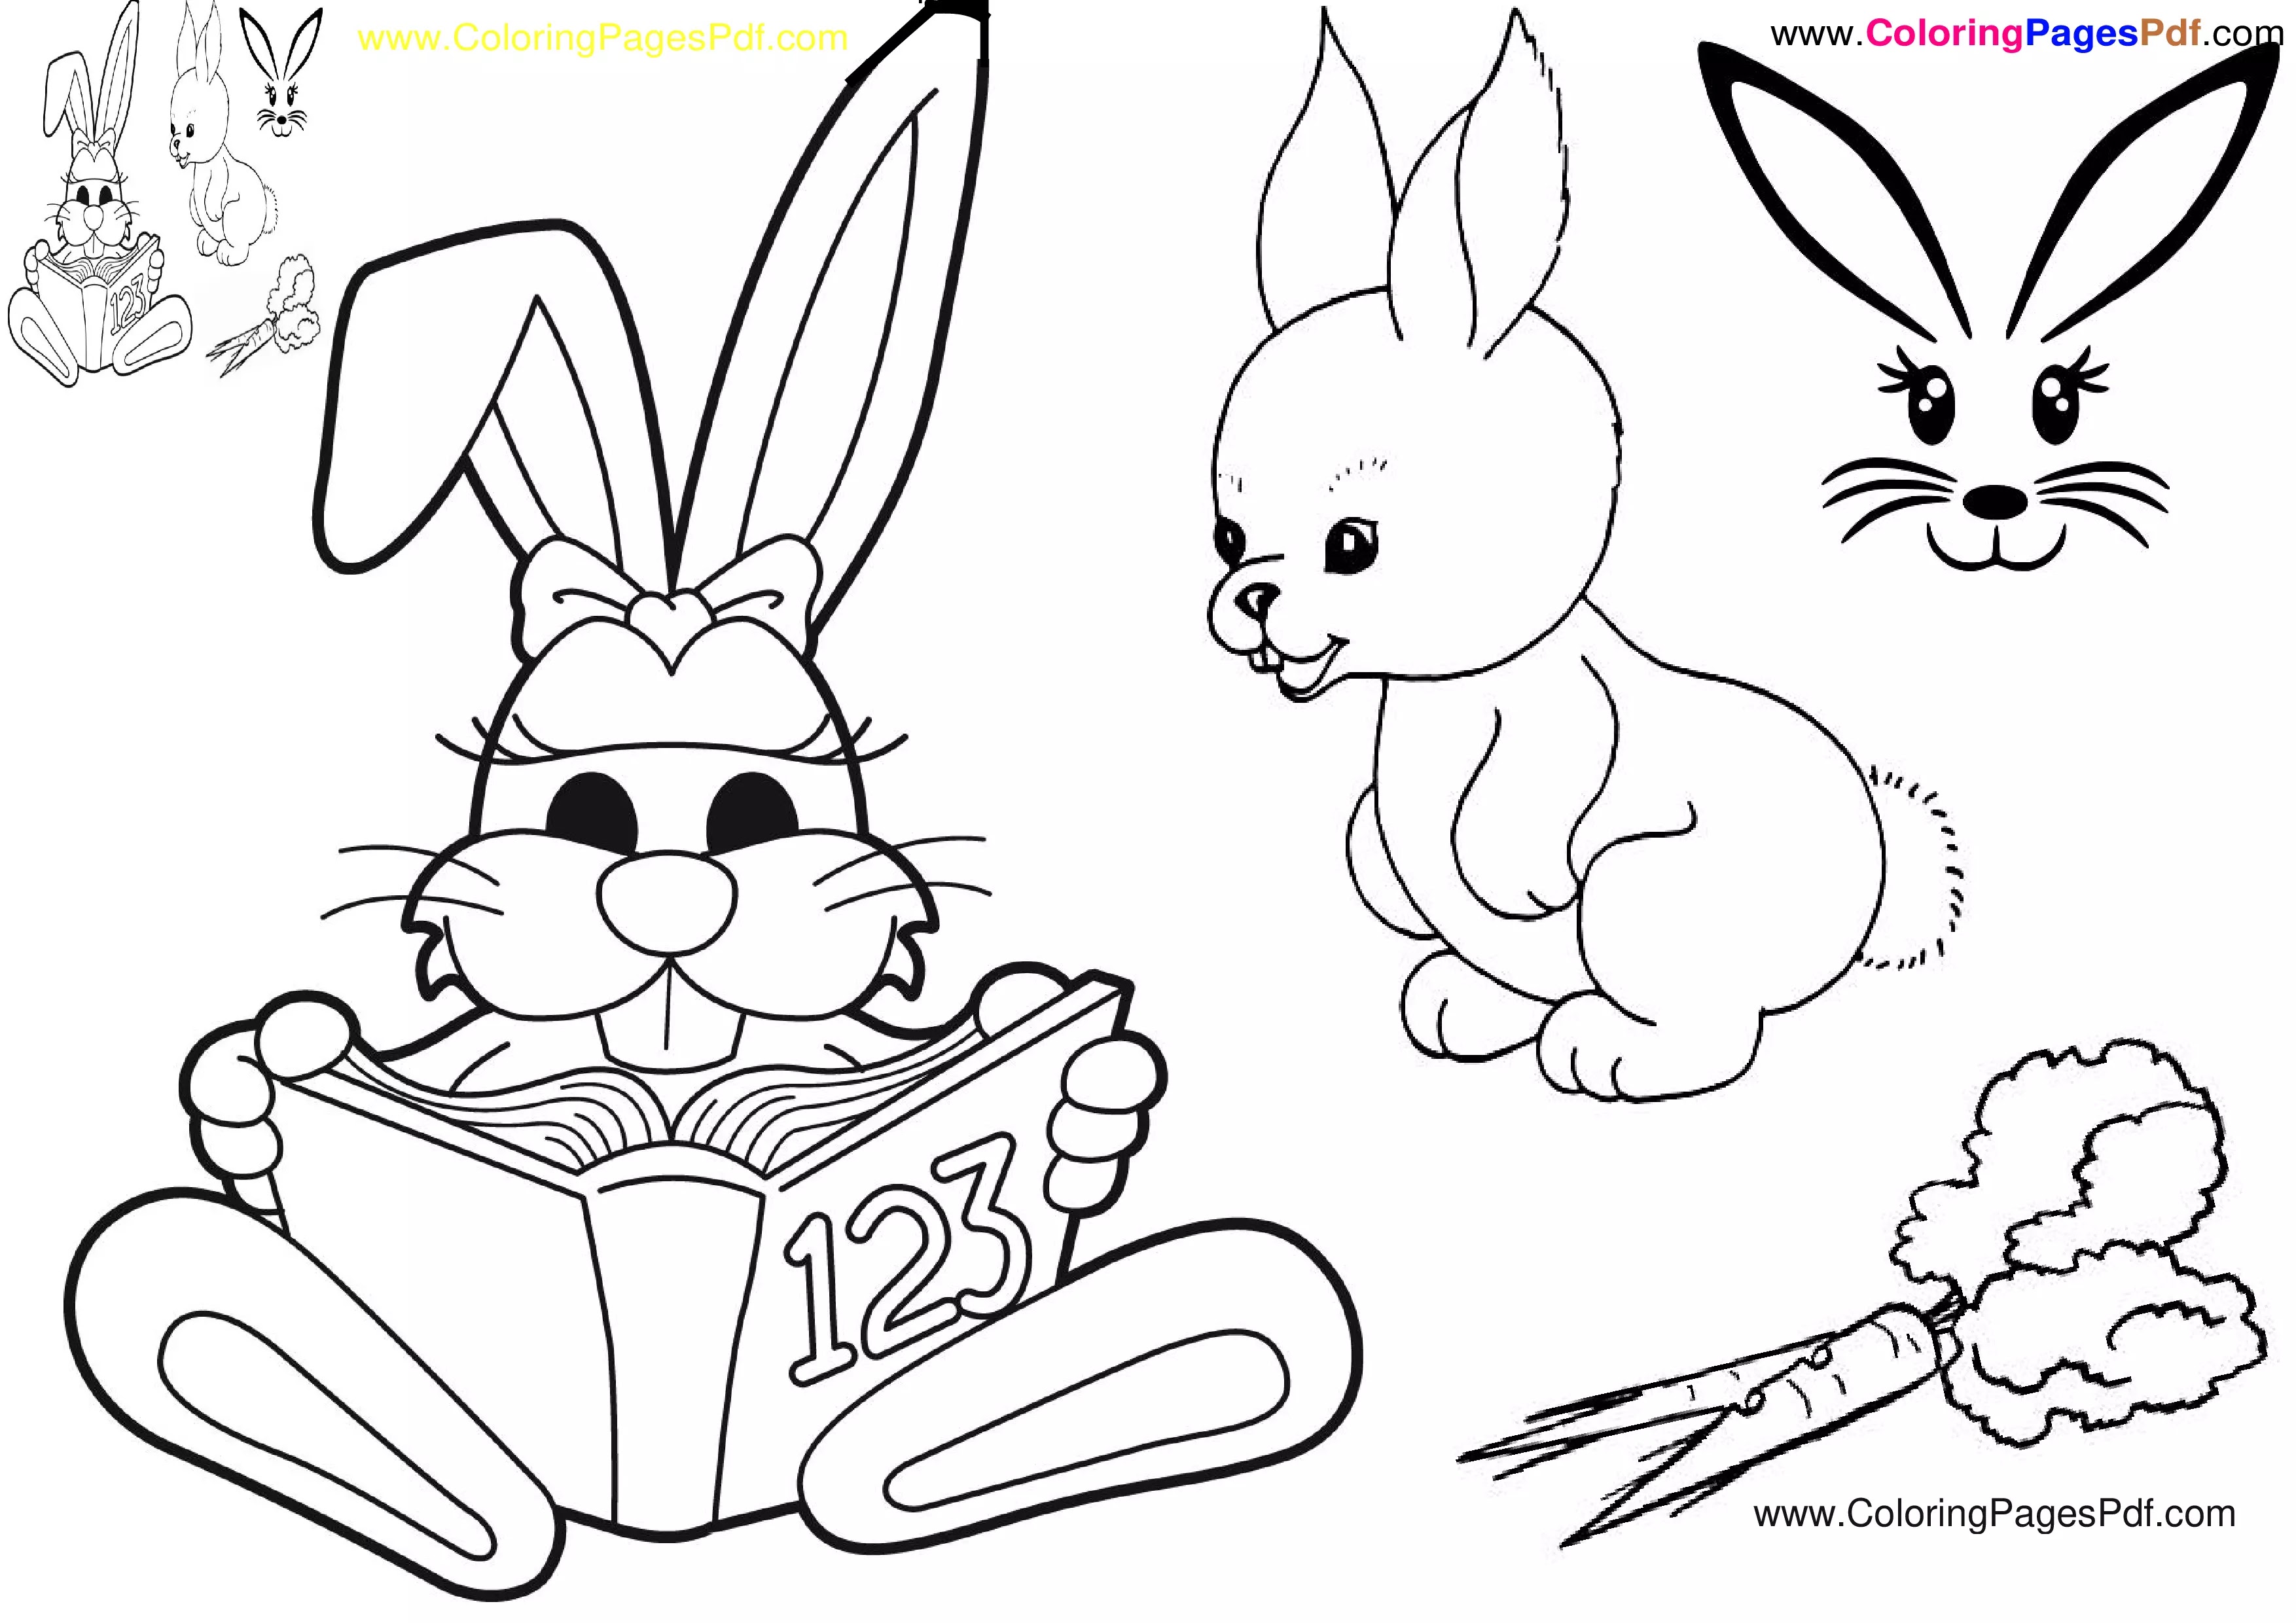 Bunny coloring pages for kindergarten